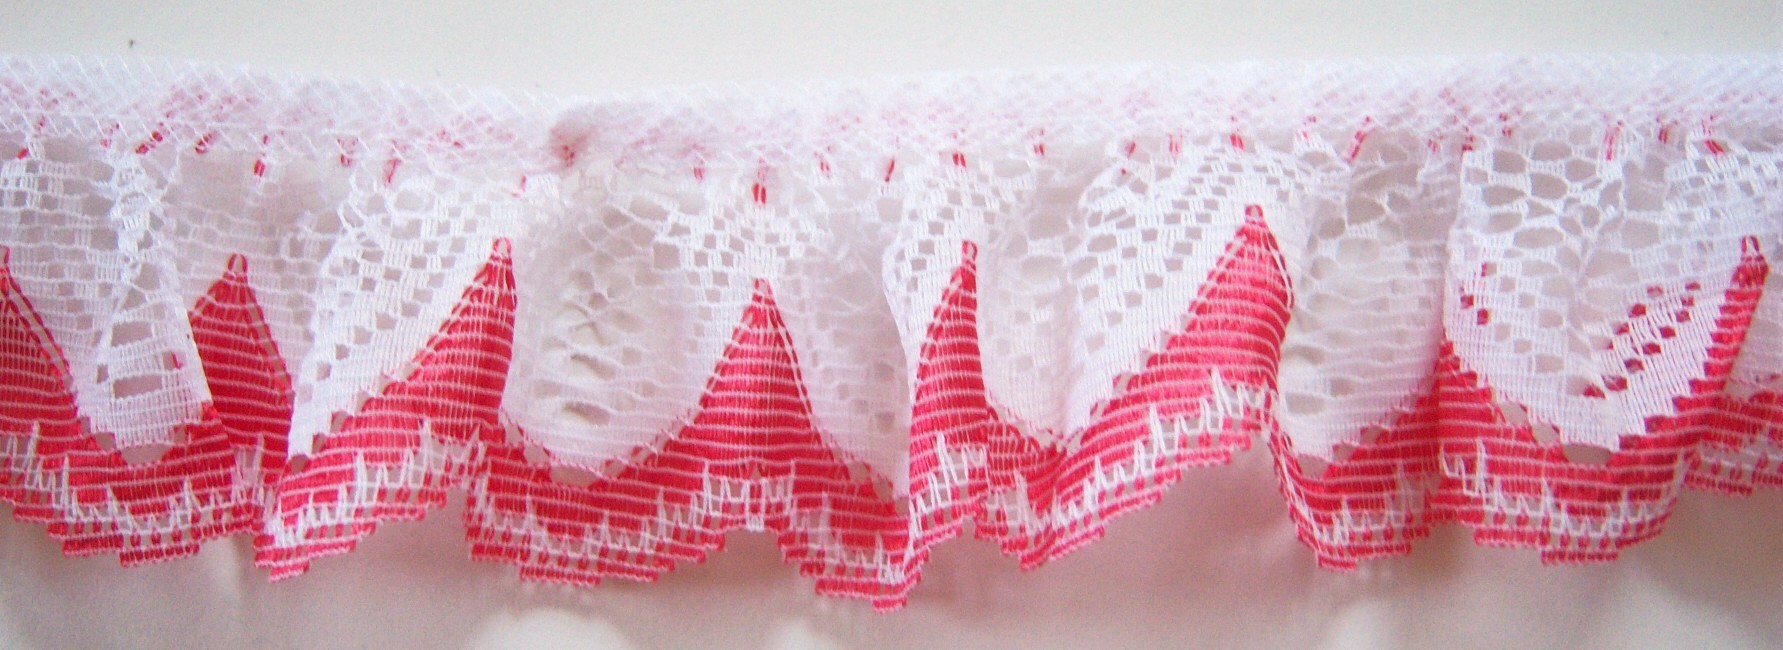 White/Red 1 3/4" Ruffled Lace